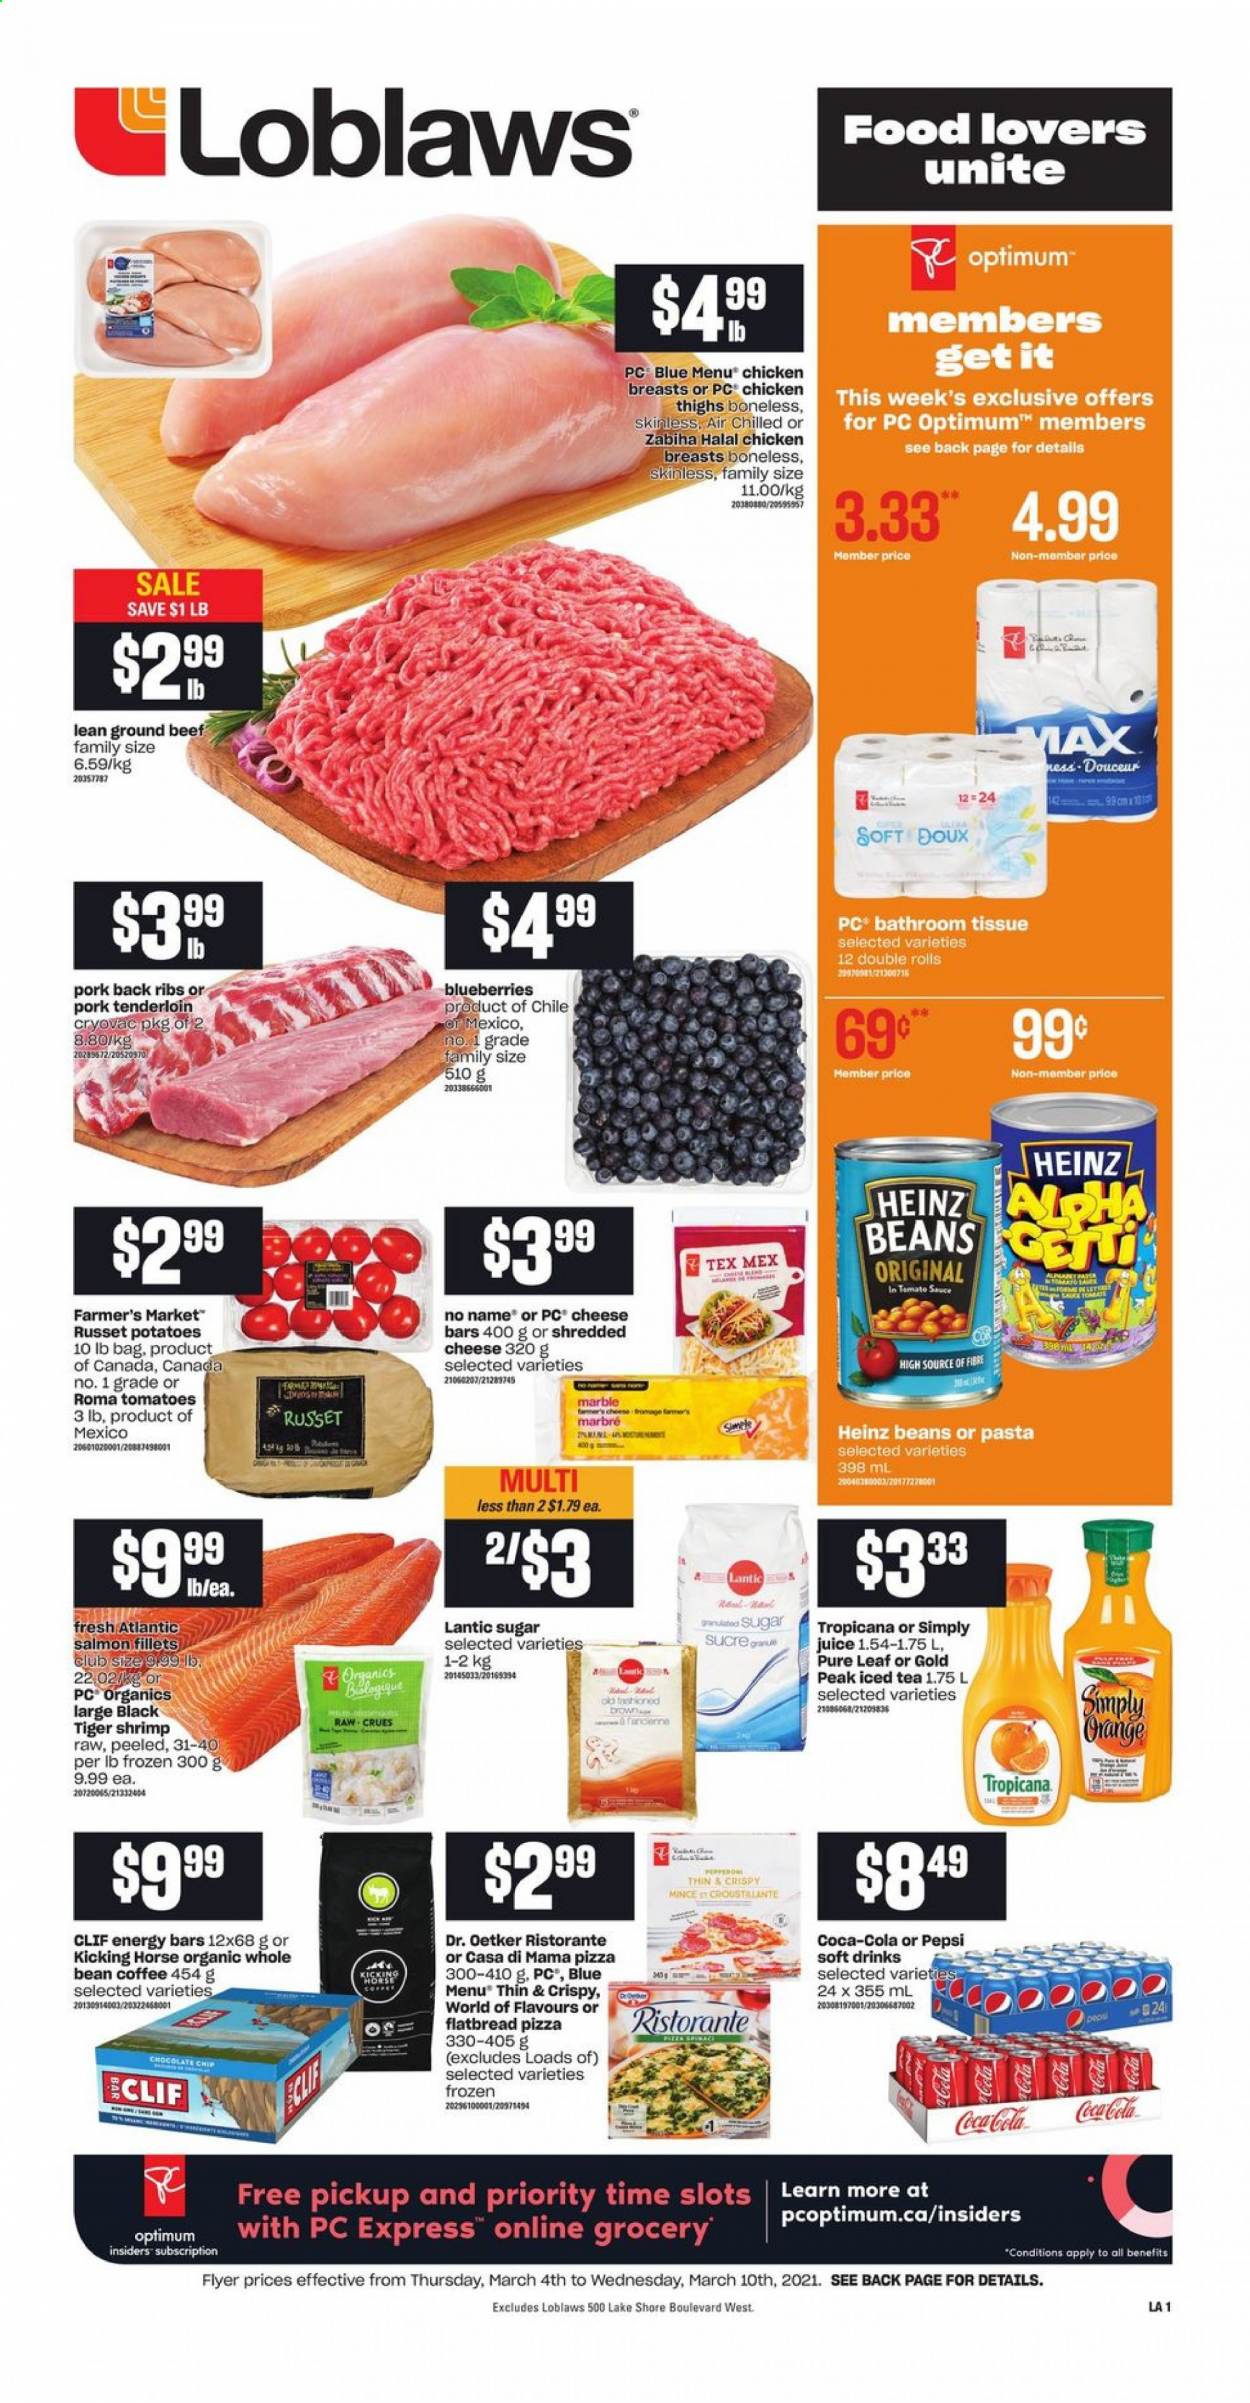 thumbnail - Loblaws Flyer - March 04, 2021 - March 10, 2021 - Sales products - flatbread, russet potatoes, potatoes, blueberries, salmon, salmon fillet, shrimps, No Name, pizza, sauce, shredded cheese, Dr. Oetker, chocolate chips, sugar, Heinz, energy bar, Coca-Cola, Pepsi, juice, ice tea, soft drink, Pure Leaf, coffee, chicken breasts, chicken thighs, chicken, beef meat, ground beef, pork meat, pork ribs, pork tenderloin, pork back ribs, bath tissue, Optimum. Page 1.